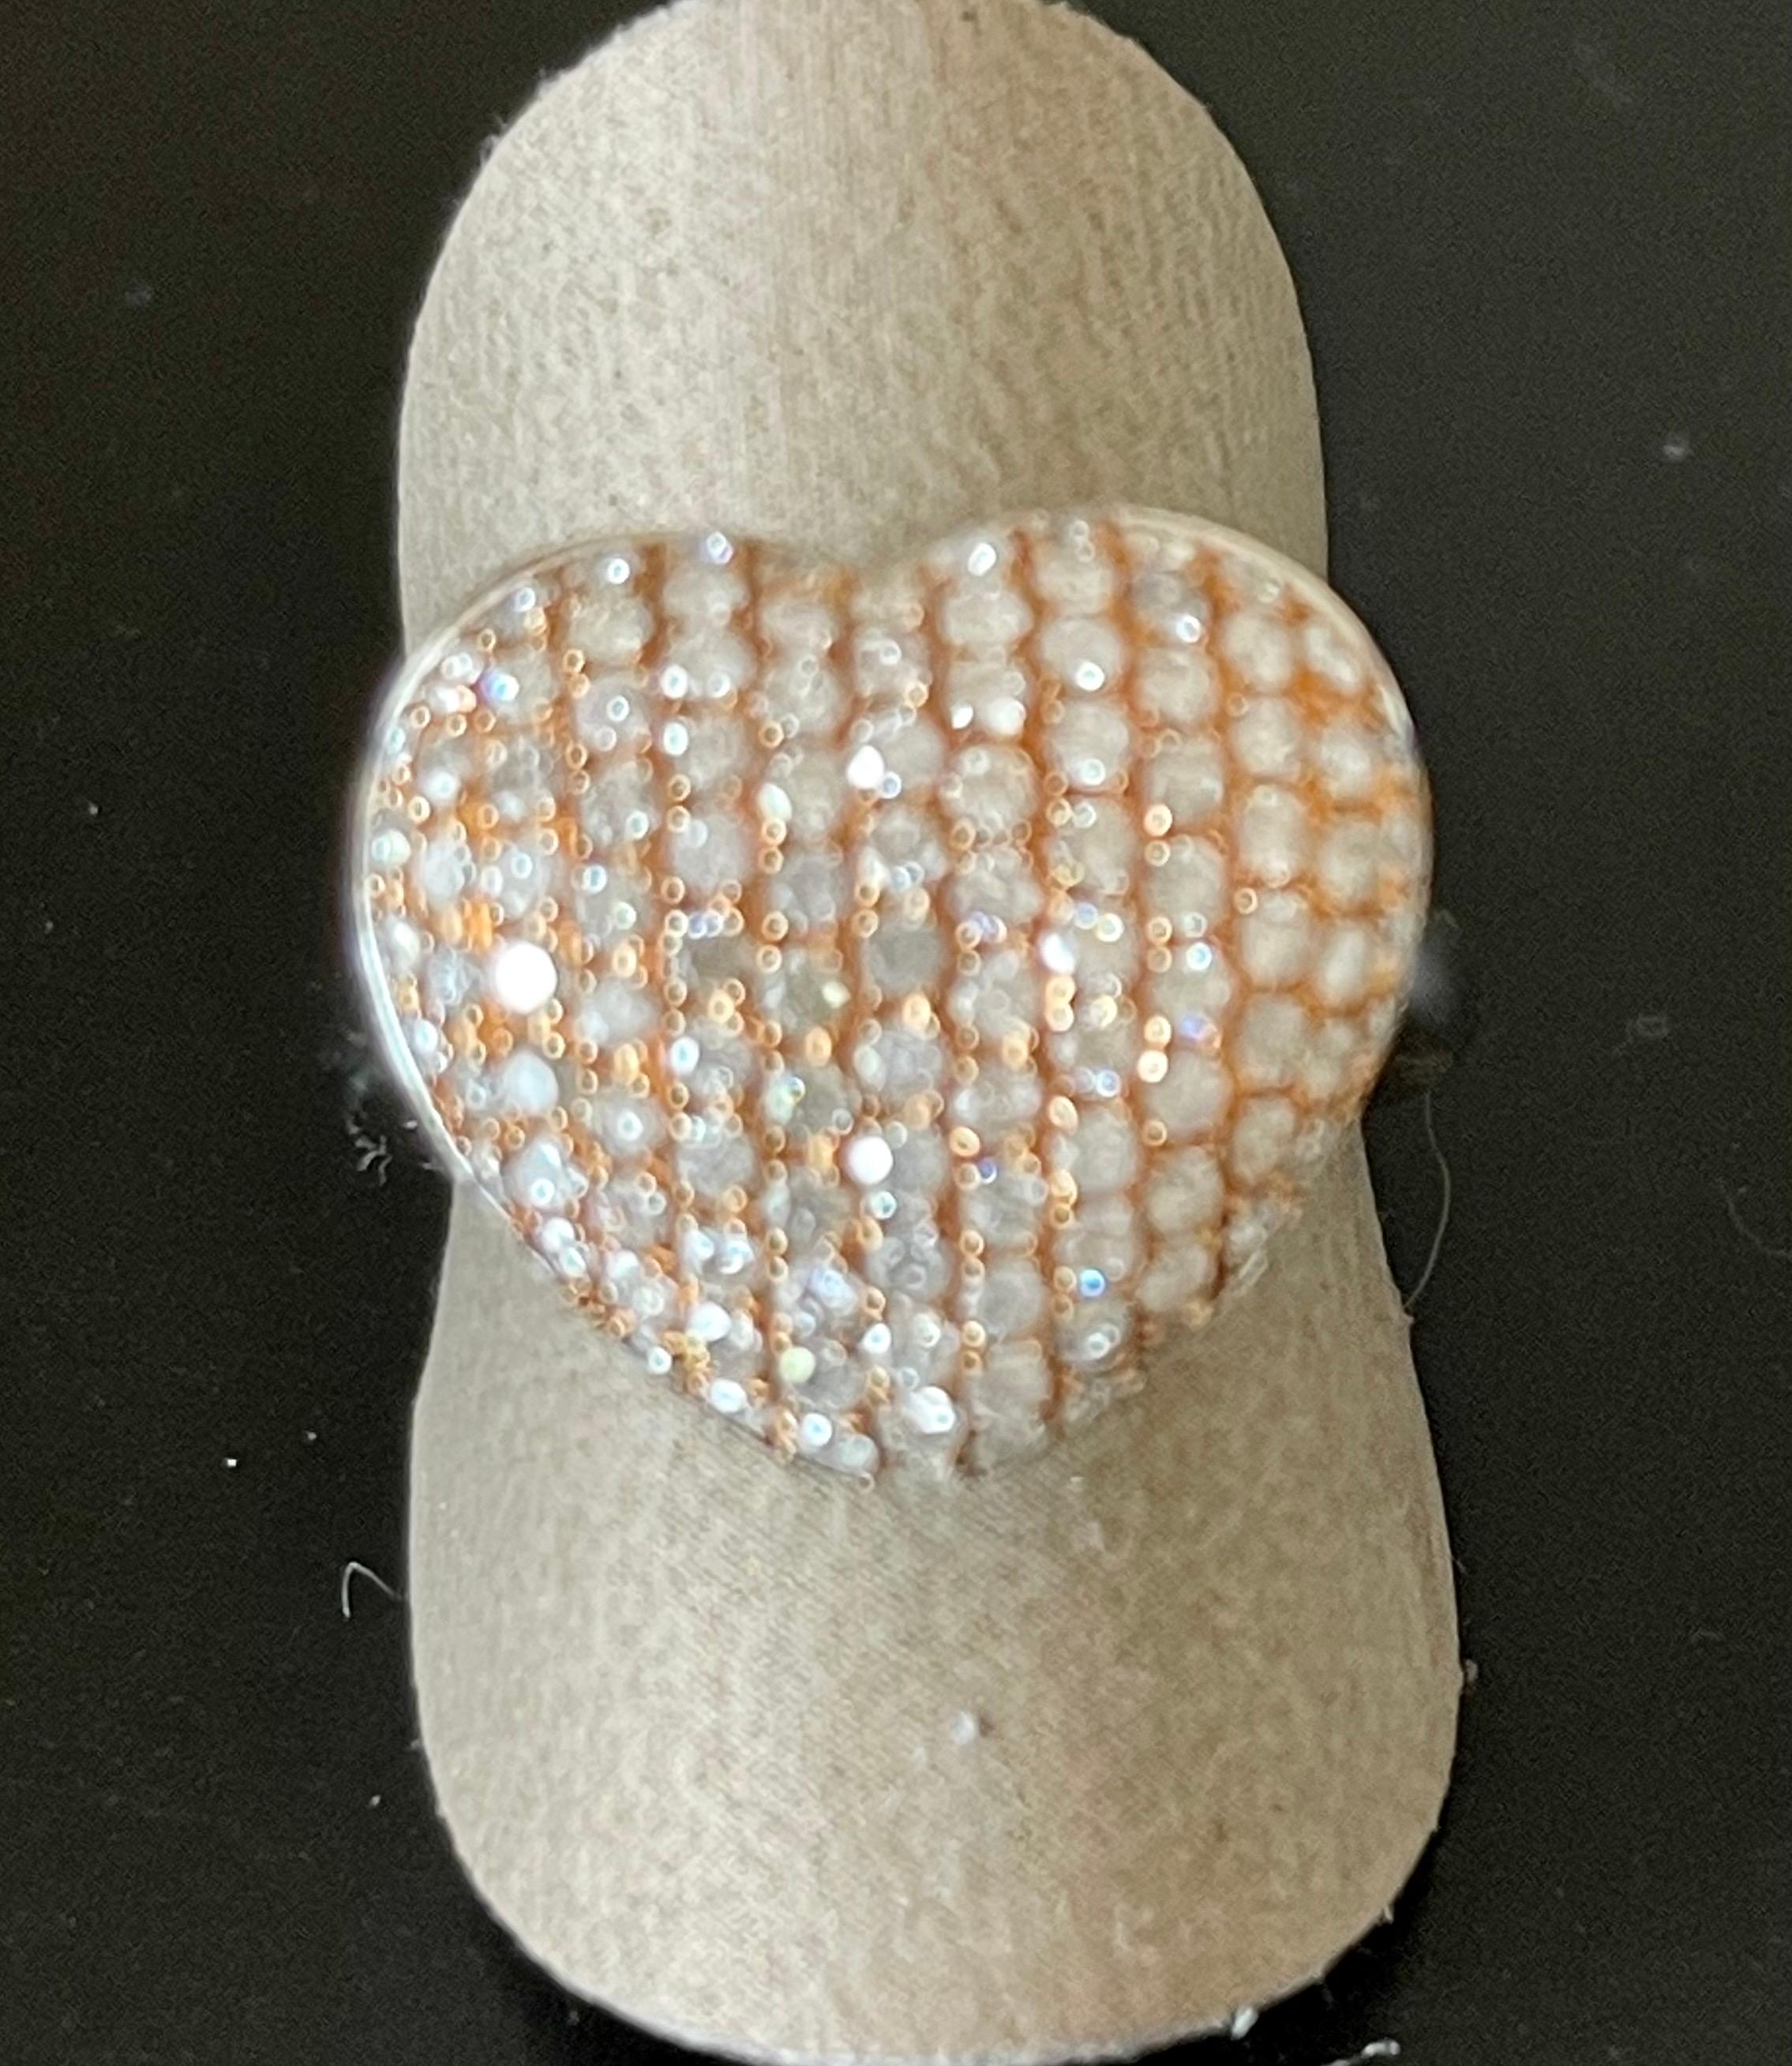 18 K white and rose Gold Ring pave set with 111 roundbrilliant cut Diamonds with a total weight 0f 1.27 ct. In the shape of a heart, slightly curved. 
The current ring size is 55 ( US size 7 1/2) but can be resized easily. 
Masterfully handcrafted